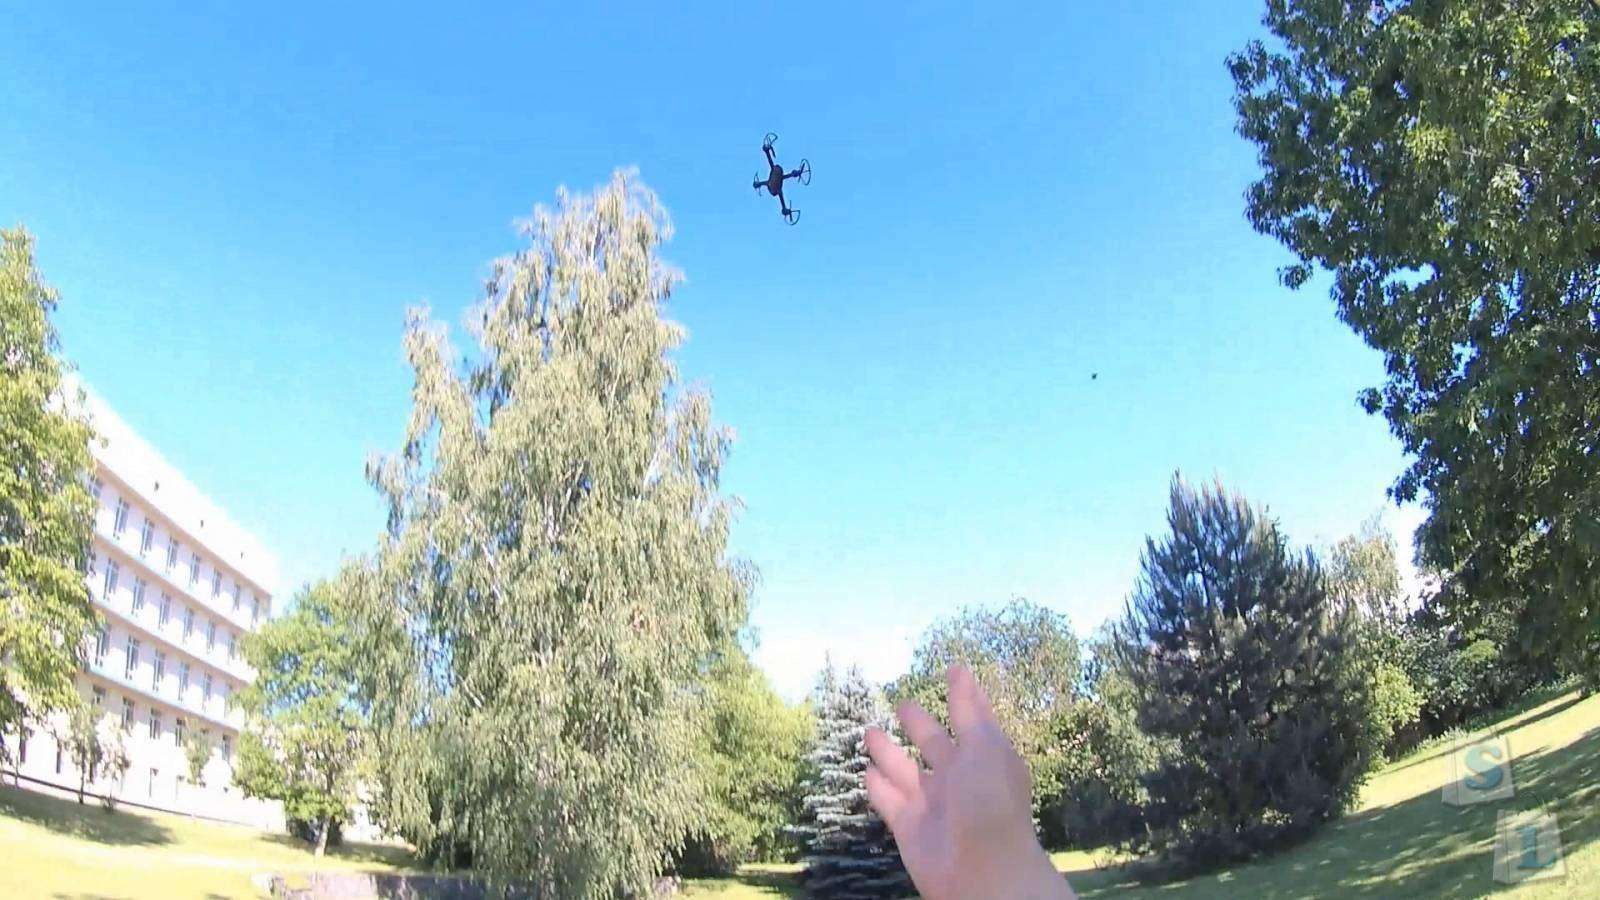 Banggood: DM007 2.4GHz, 4Ch, 6 Axis Gyro, RC Quadcopter with Headless Mode and 2MP Camera (RTF)